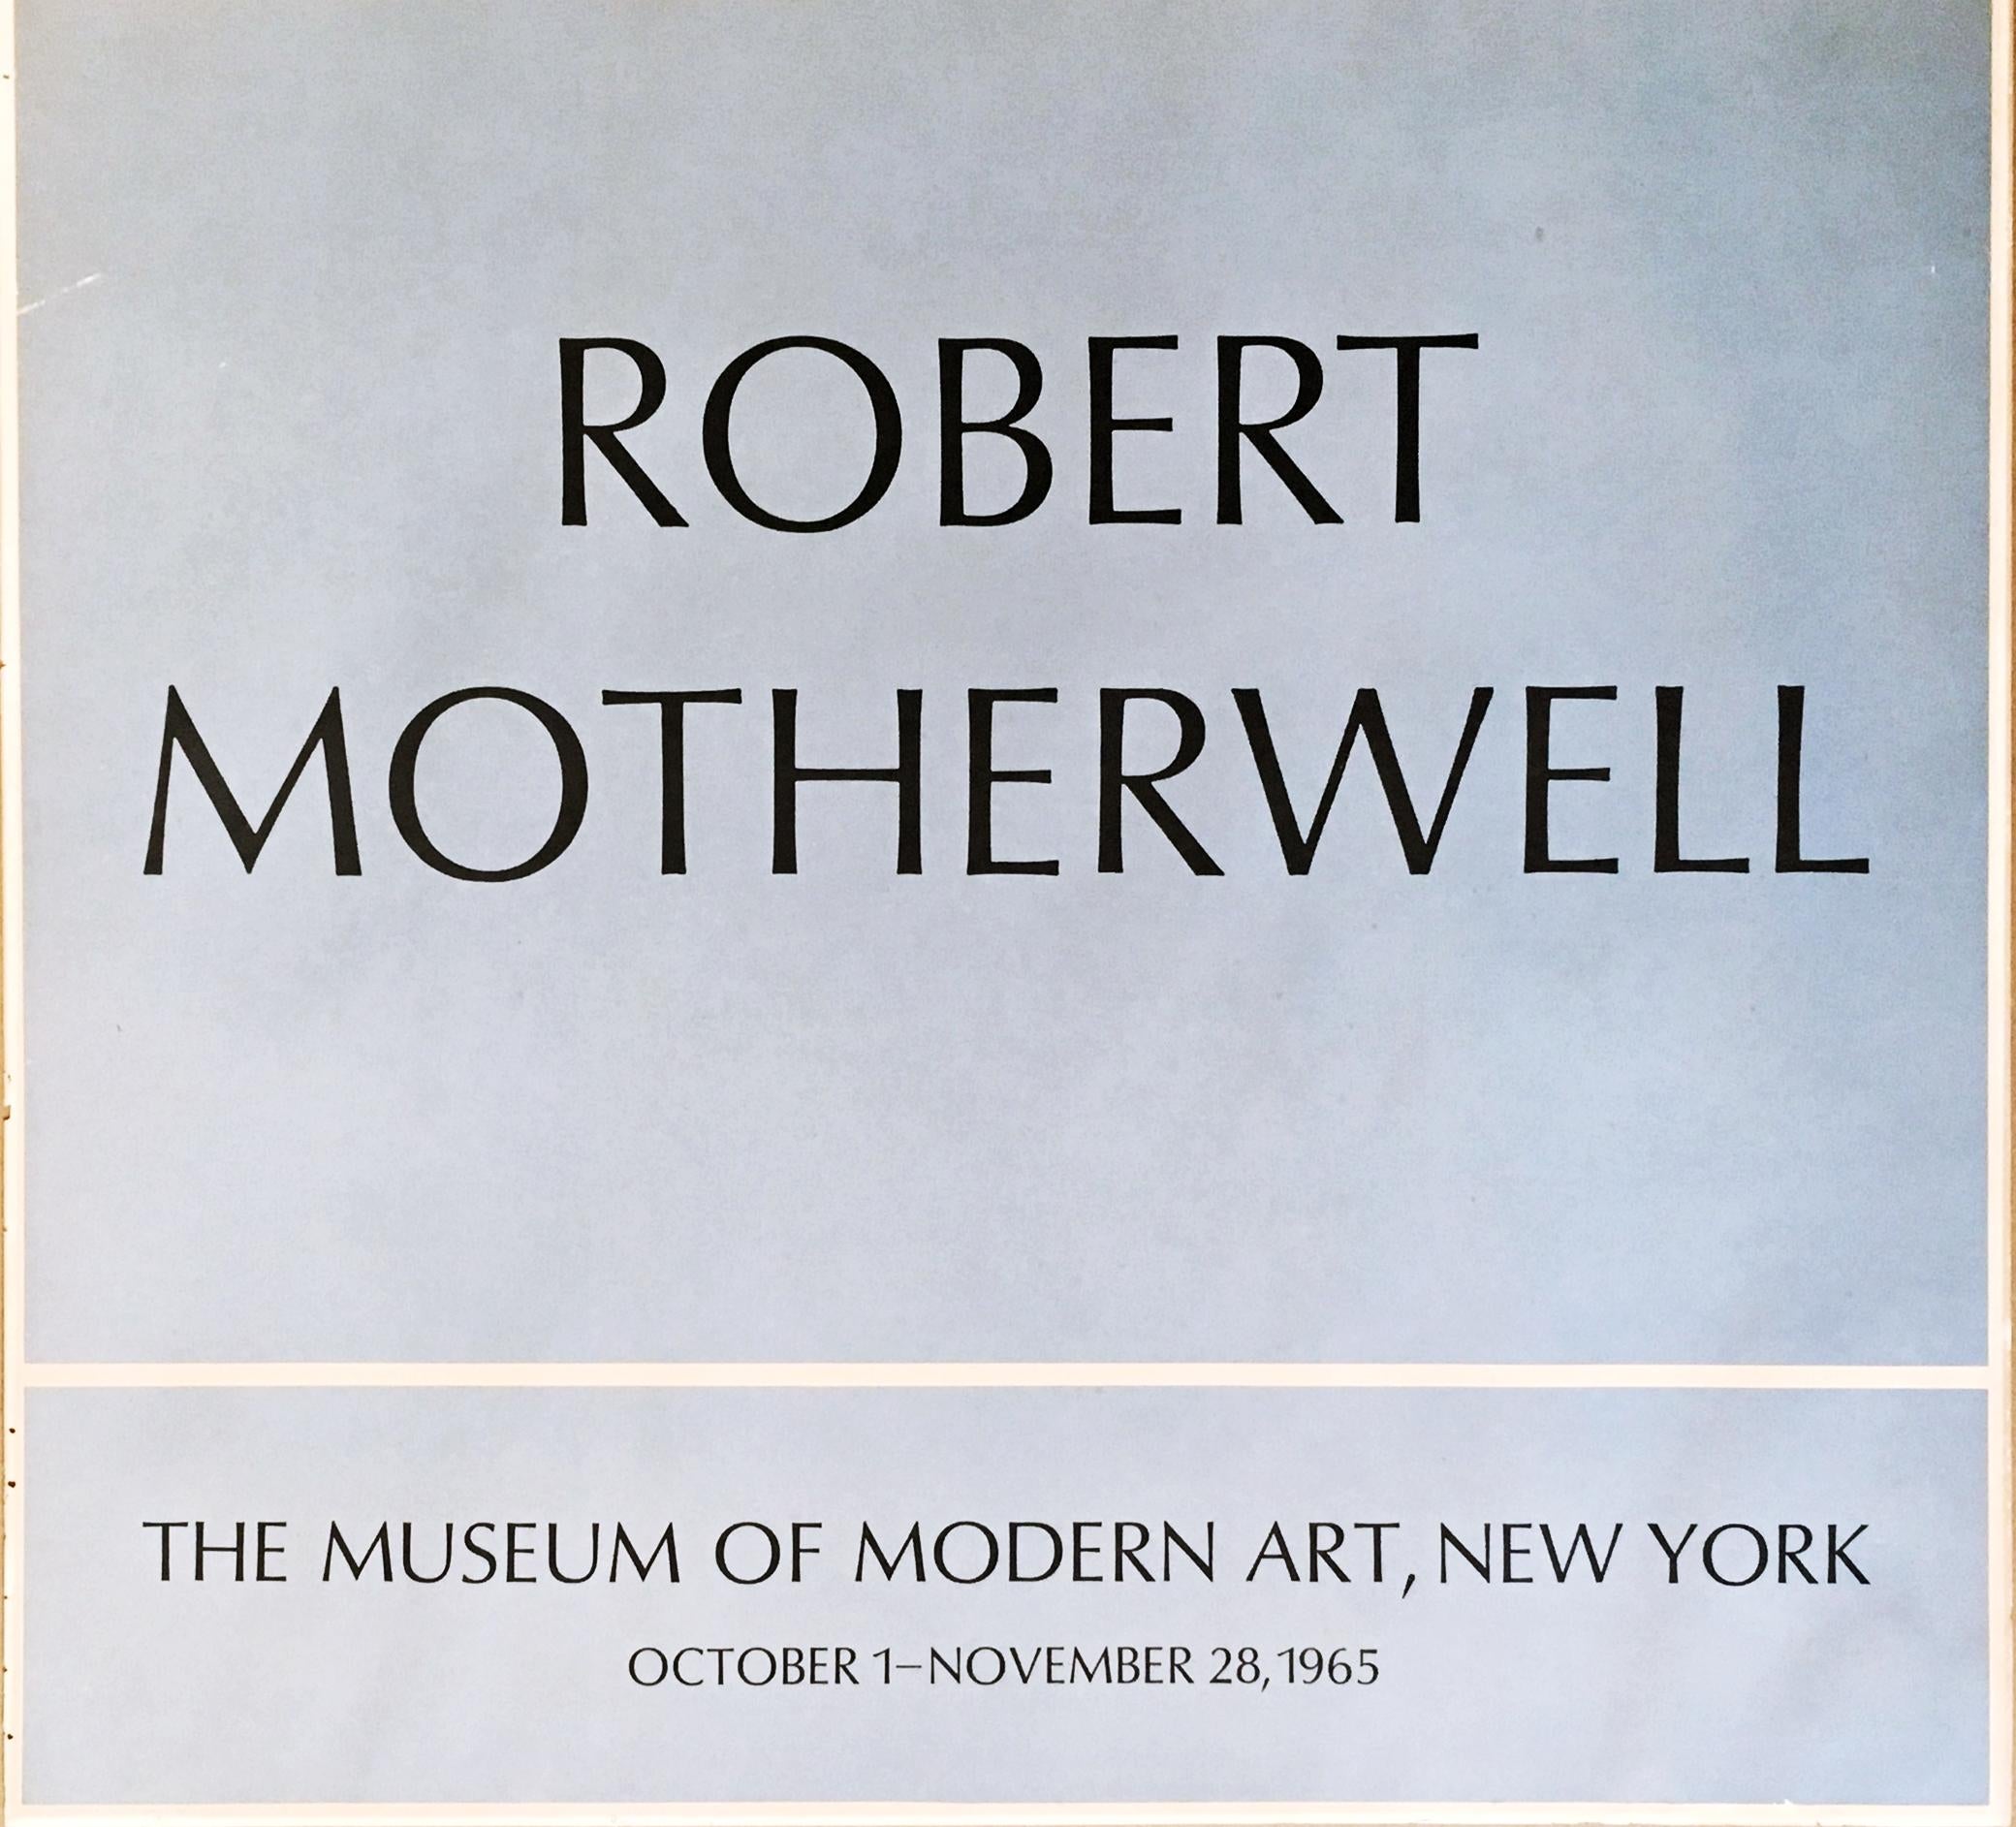 Robert Motherwell
Robert Motherwell at MOMA (Hand signed and inscribed by Robert Motherwell), 1965
Offset Lithograph Poster (hand signed and inscribed by Robert Motherwell to Vincent Fontana
Hand signed and inscribed by Robert Motherwell on the